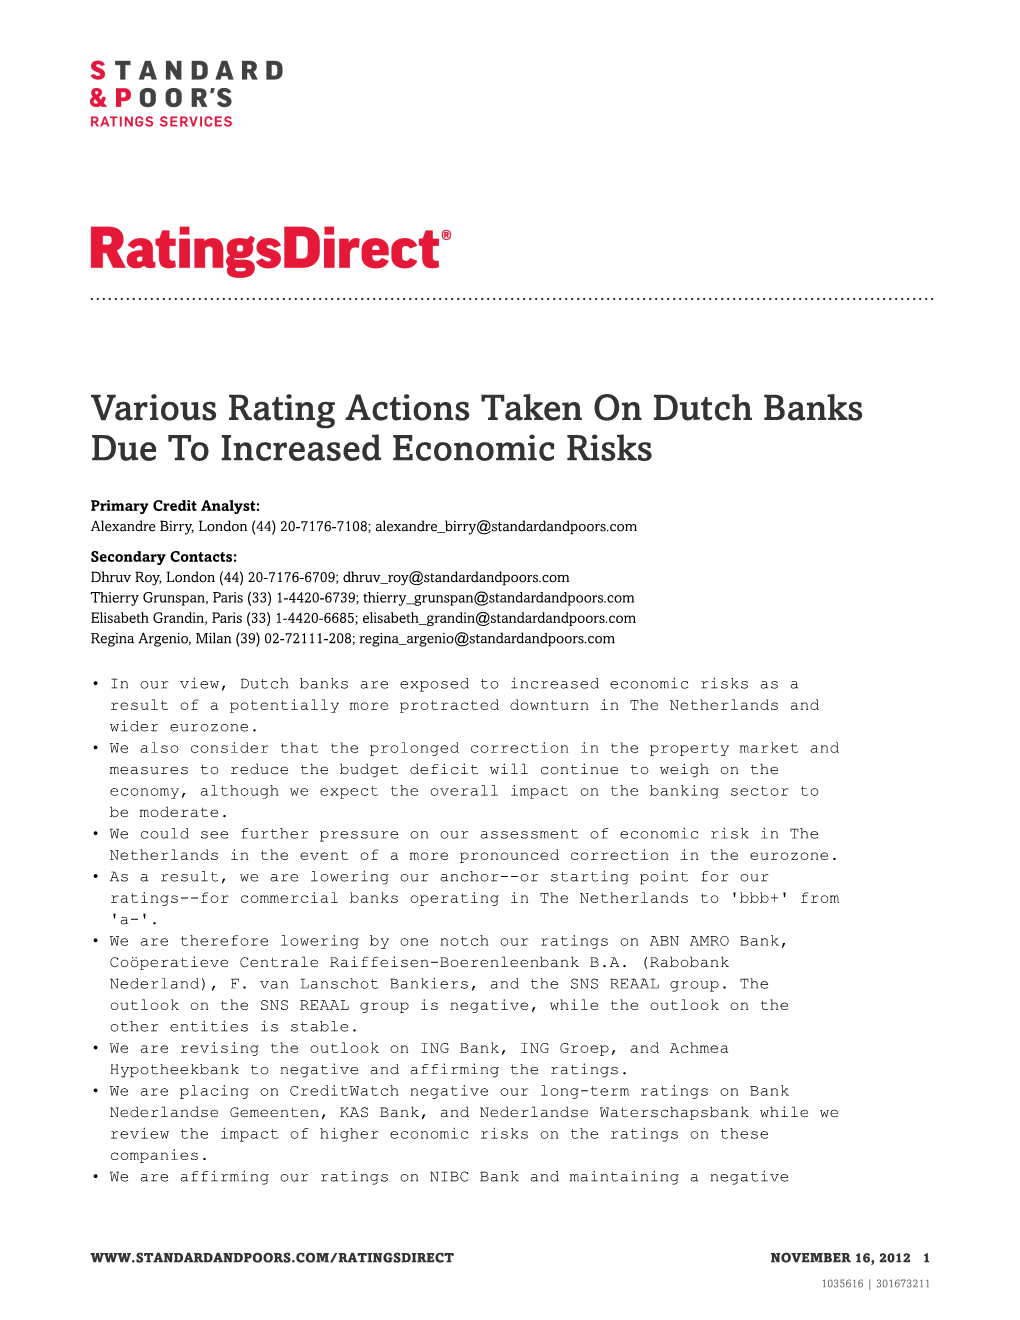 Various Rating Actions Taken on Dutch Banks Due to Increased Economic Risks